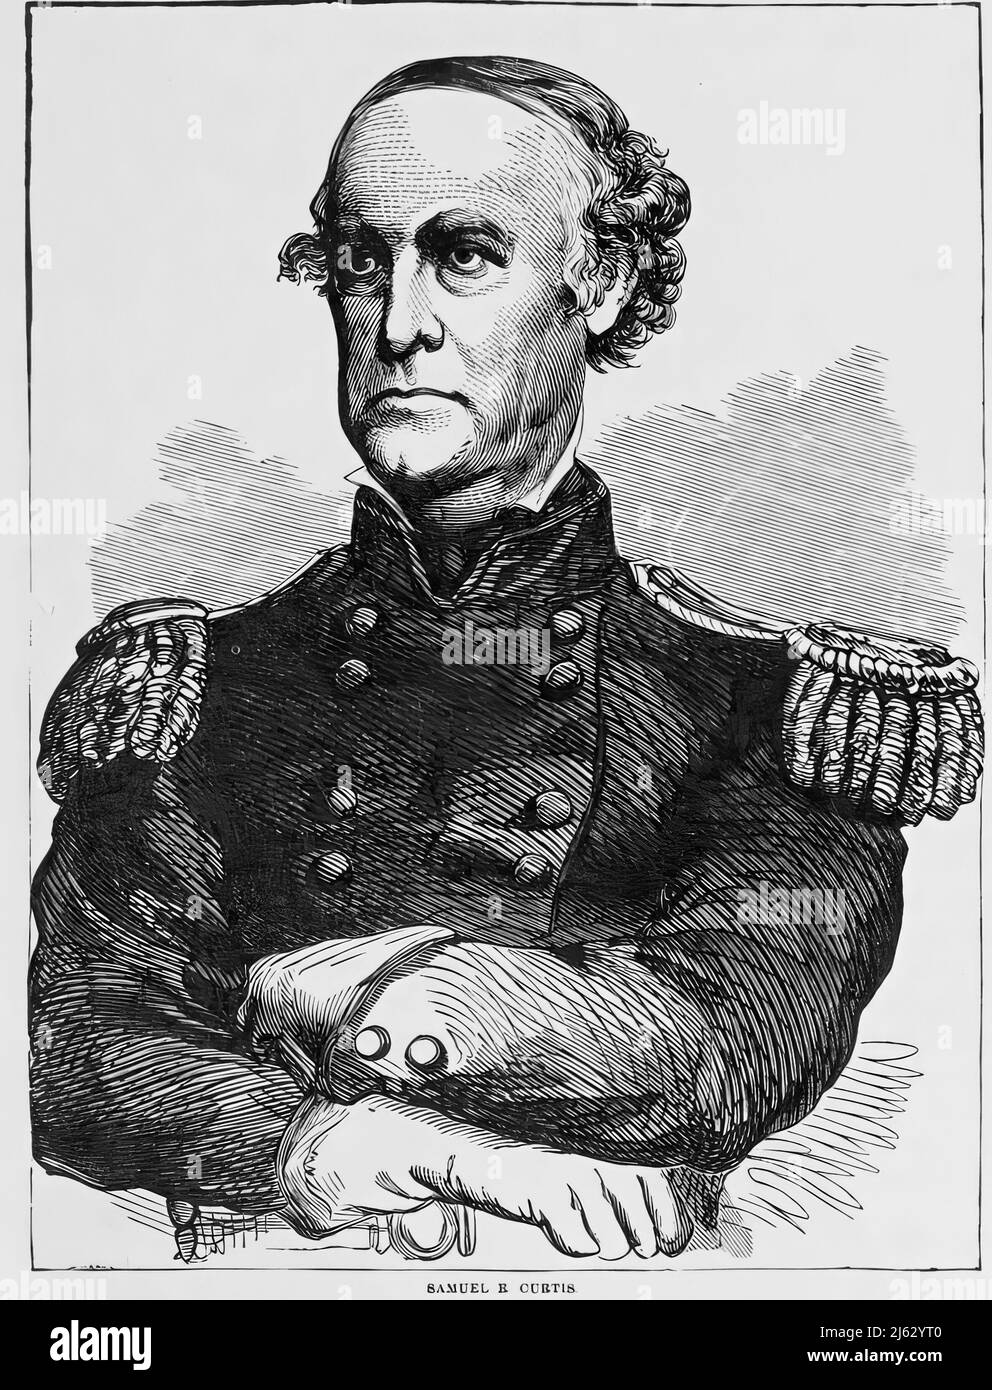 Portrait of Samuel Ryan Curtis, Union Army General in the American Civil War. 19th century illustration Stock Photo